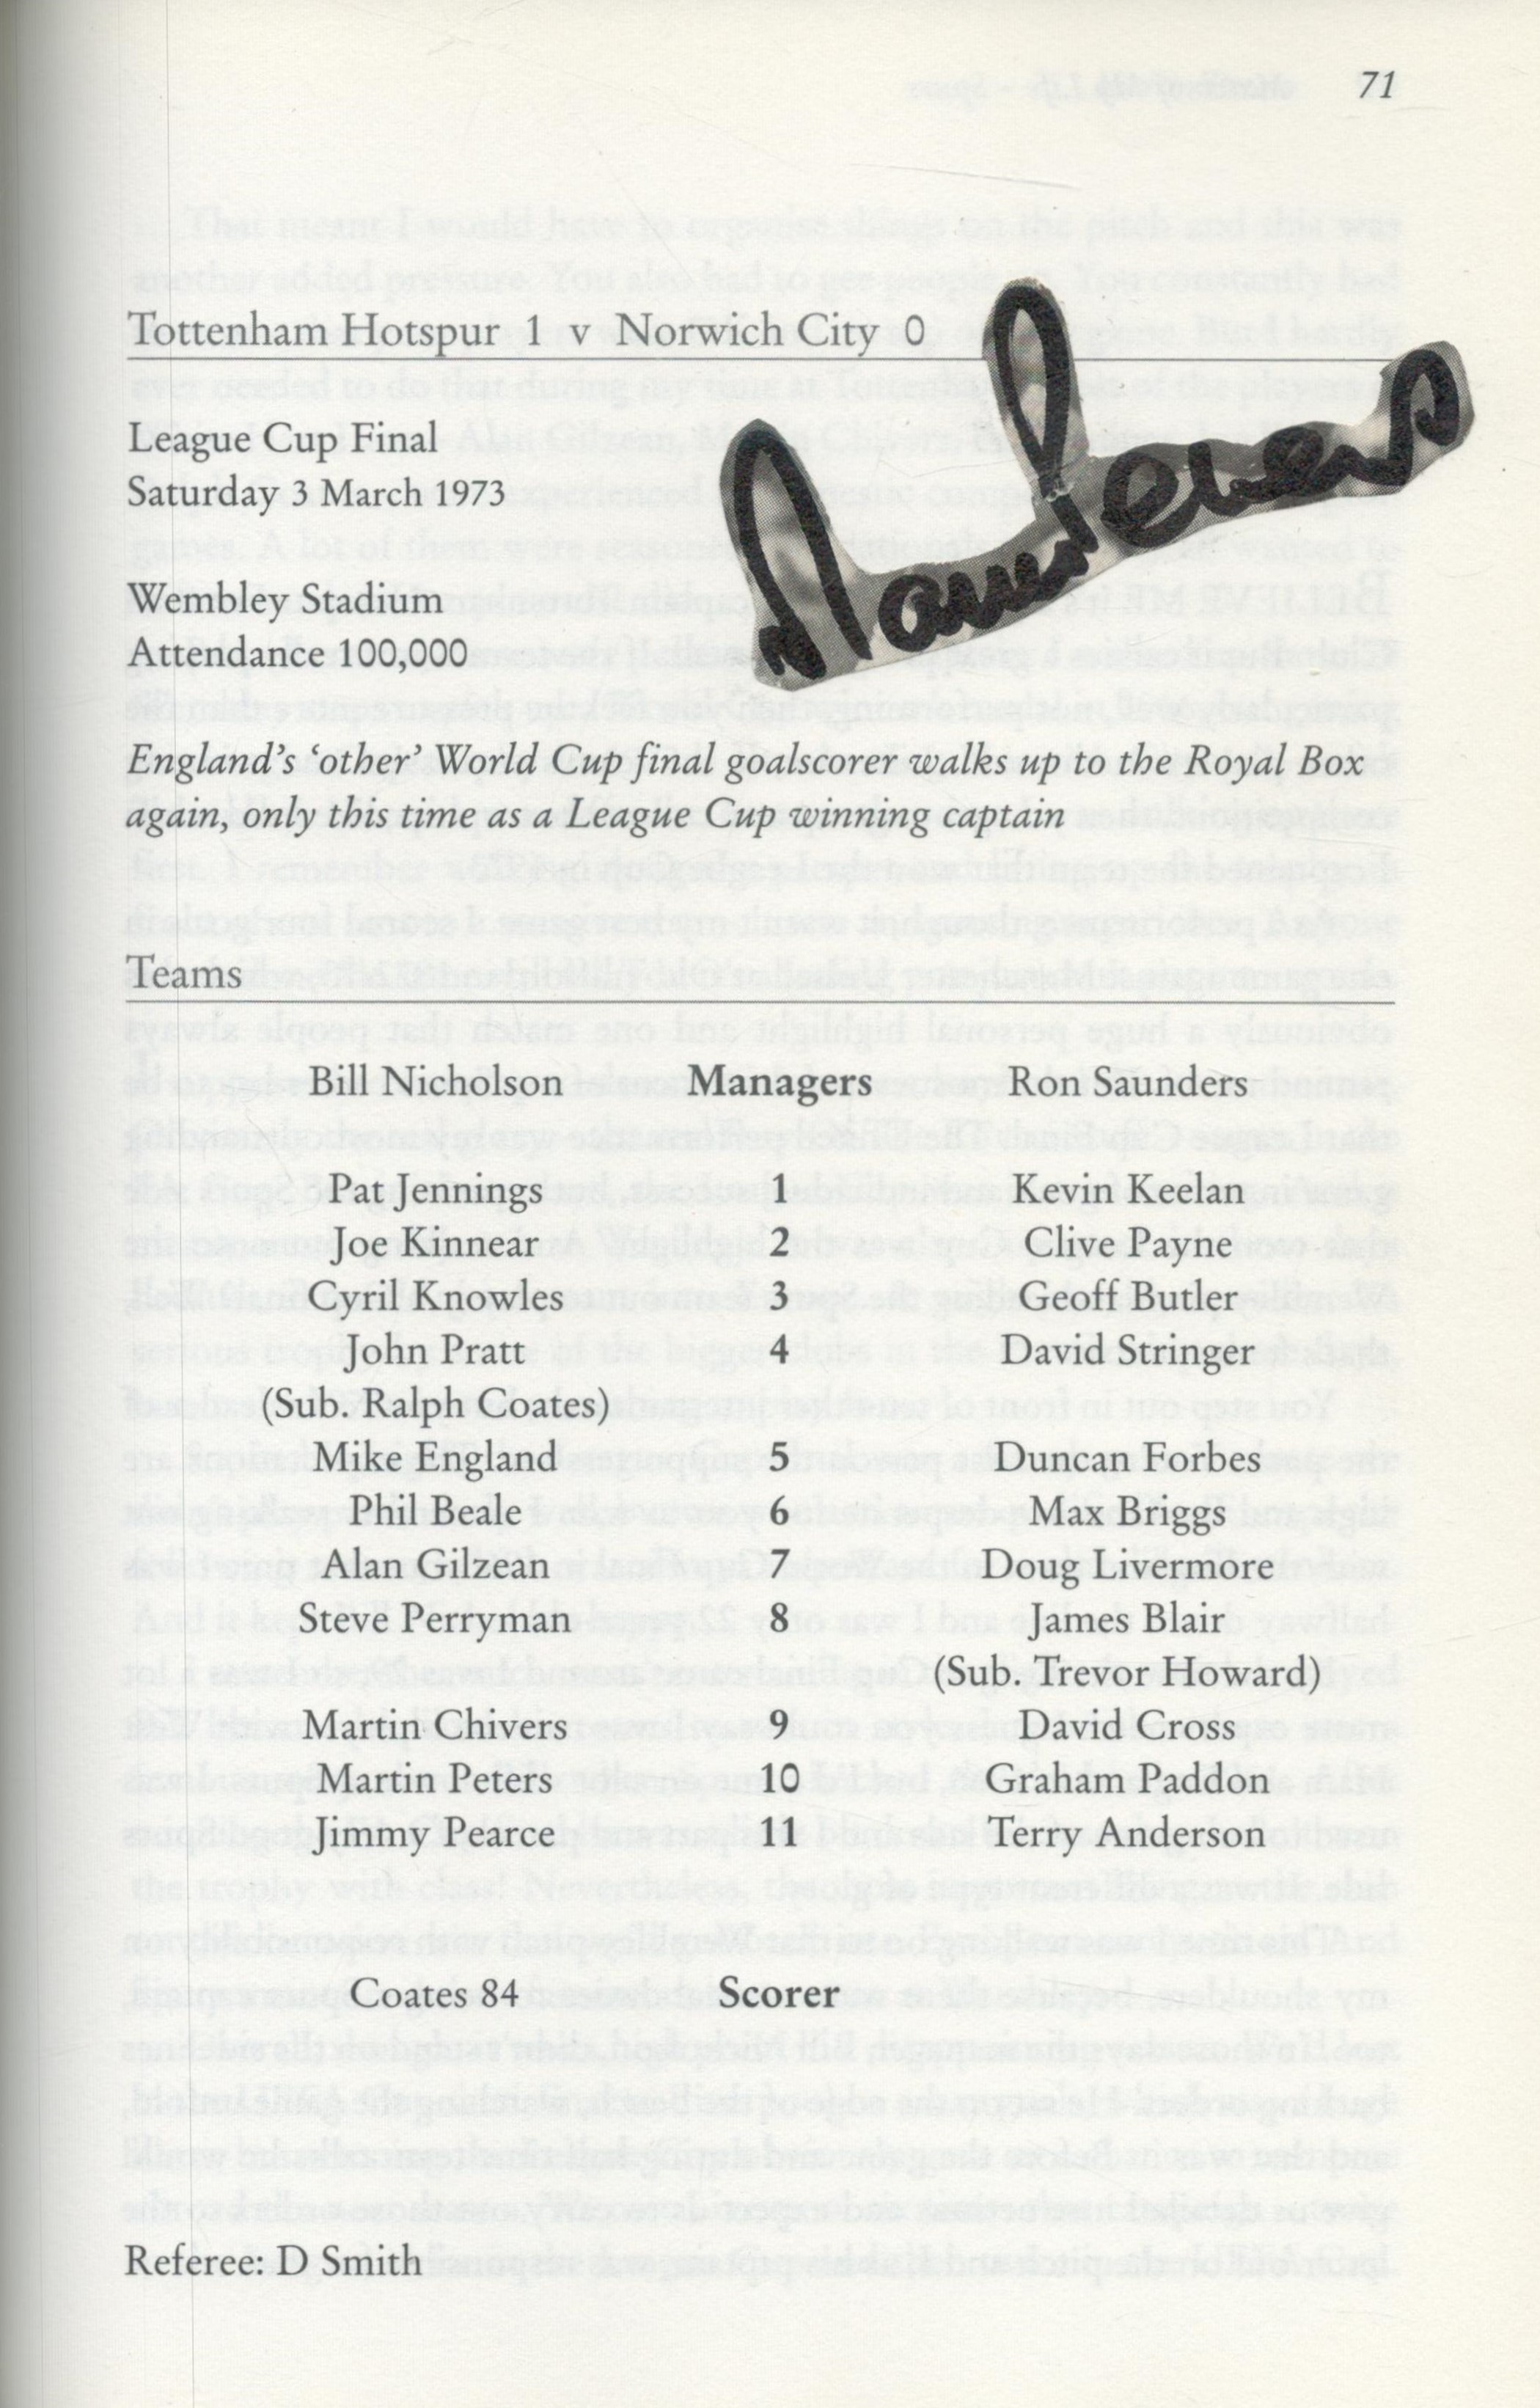 Match of my life - Spurs multi-signed hardback book. Signature clippings attached to inside pages. - Image 2 of 6